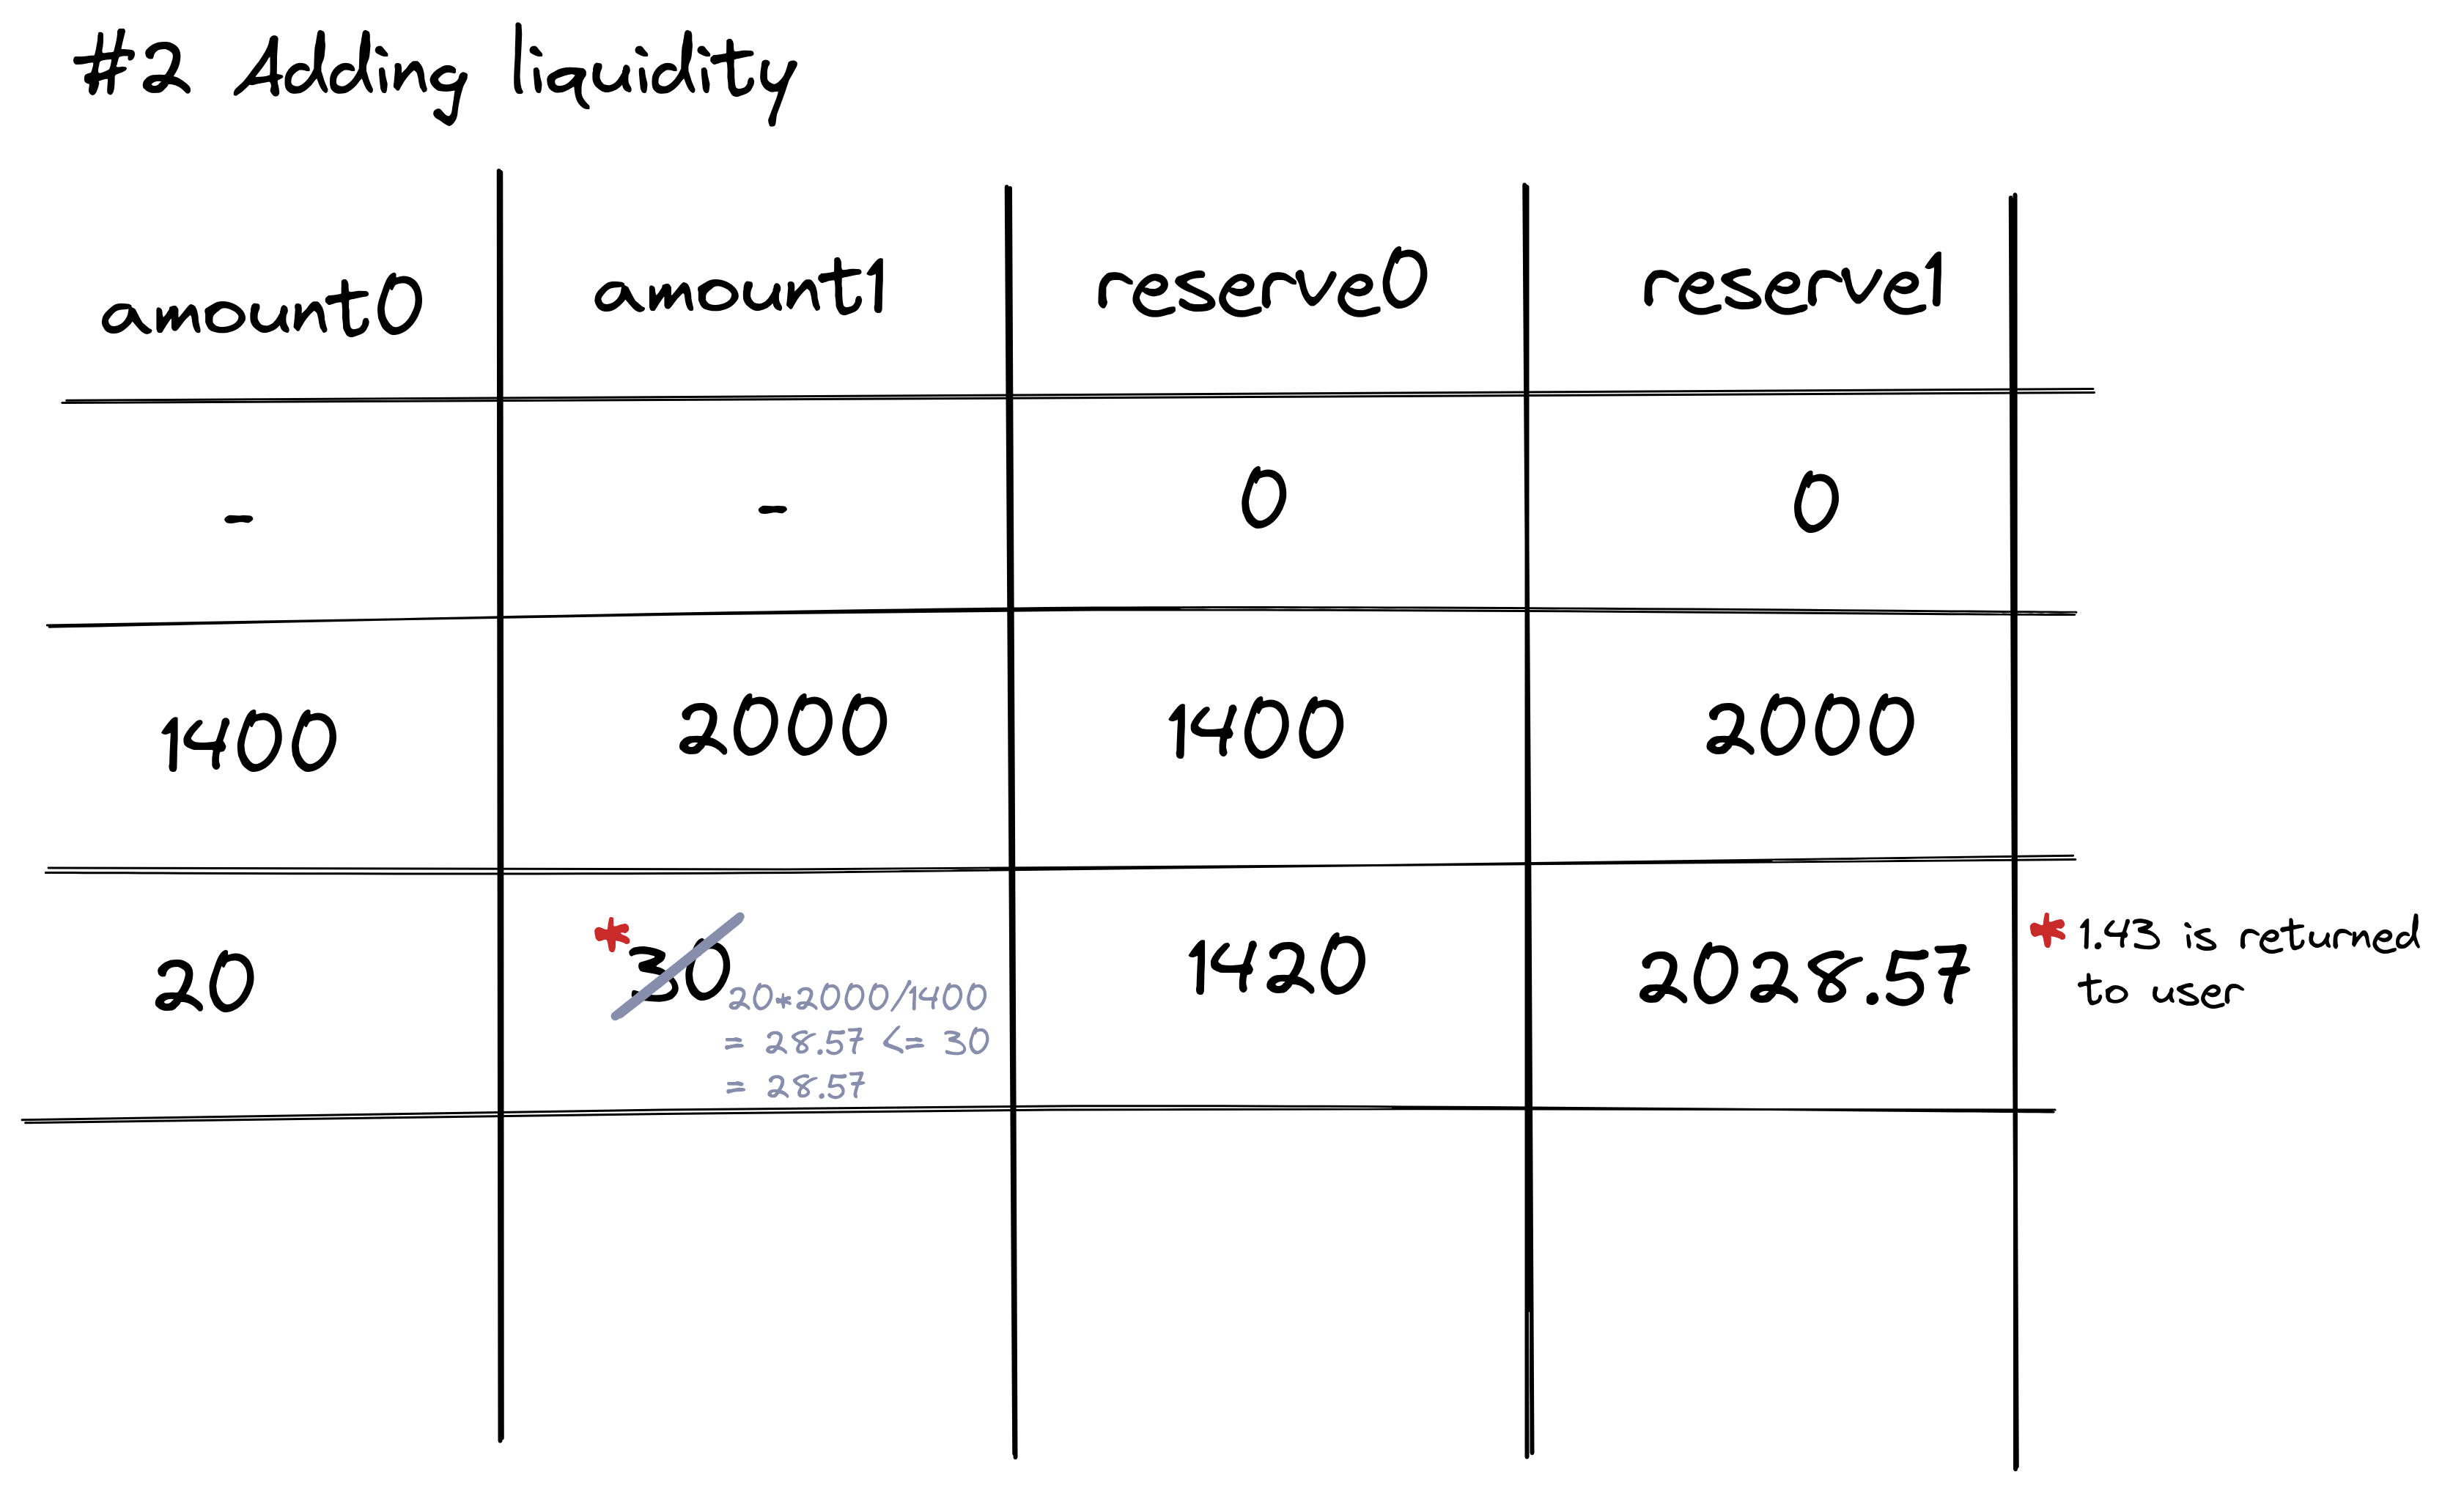 Table with amount0, amount1, reserve0, reserve1